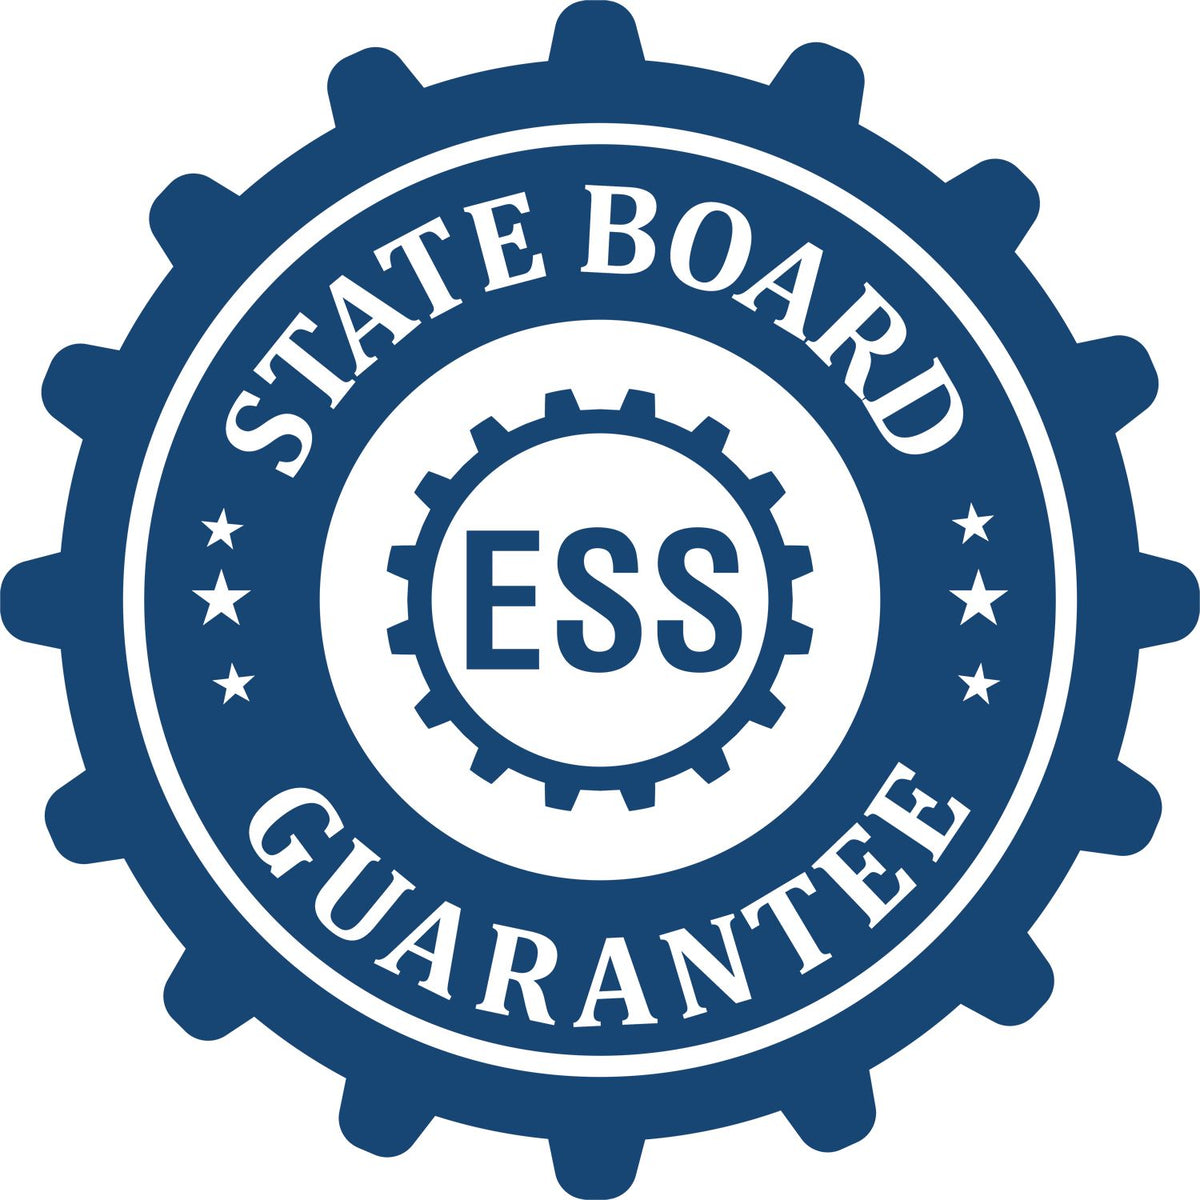 An emblem in a gear shape illustrating a state board guarantee for the Extended Long Reach Kansas Surveyor Embosser product.